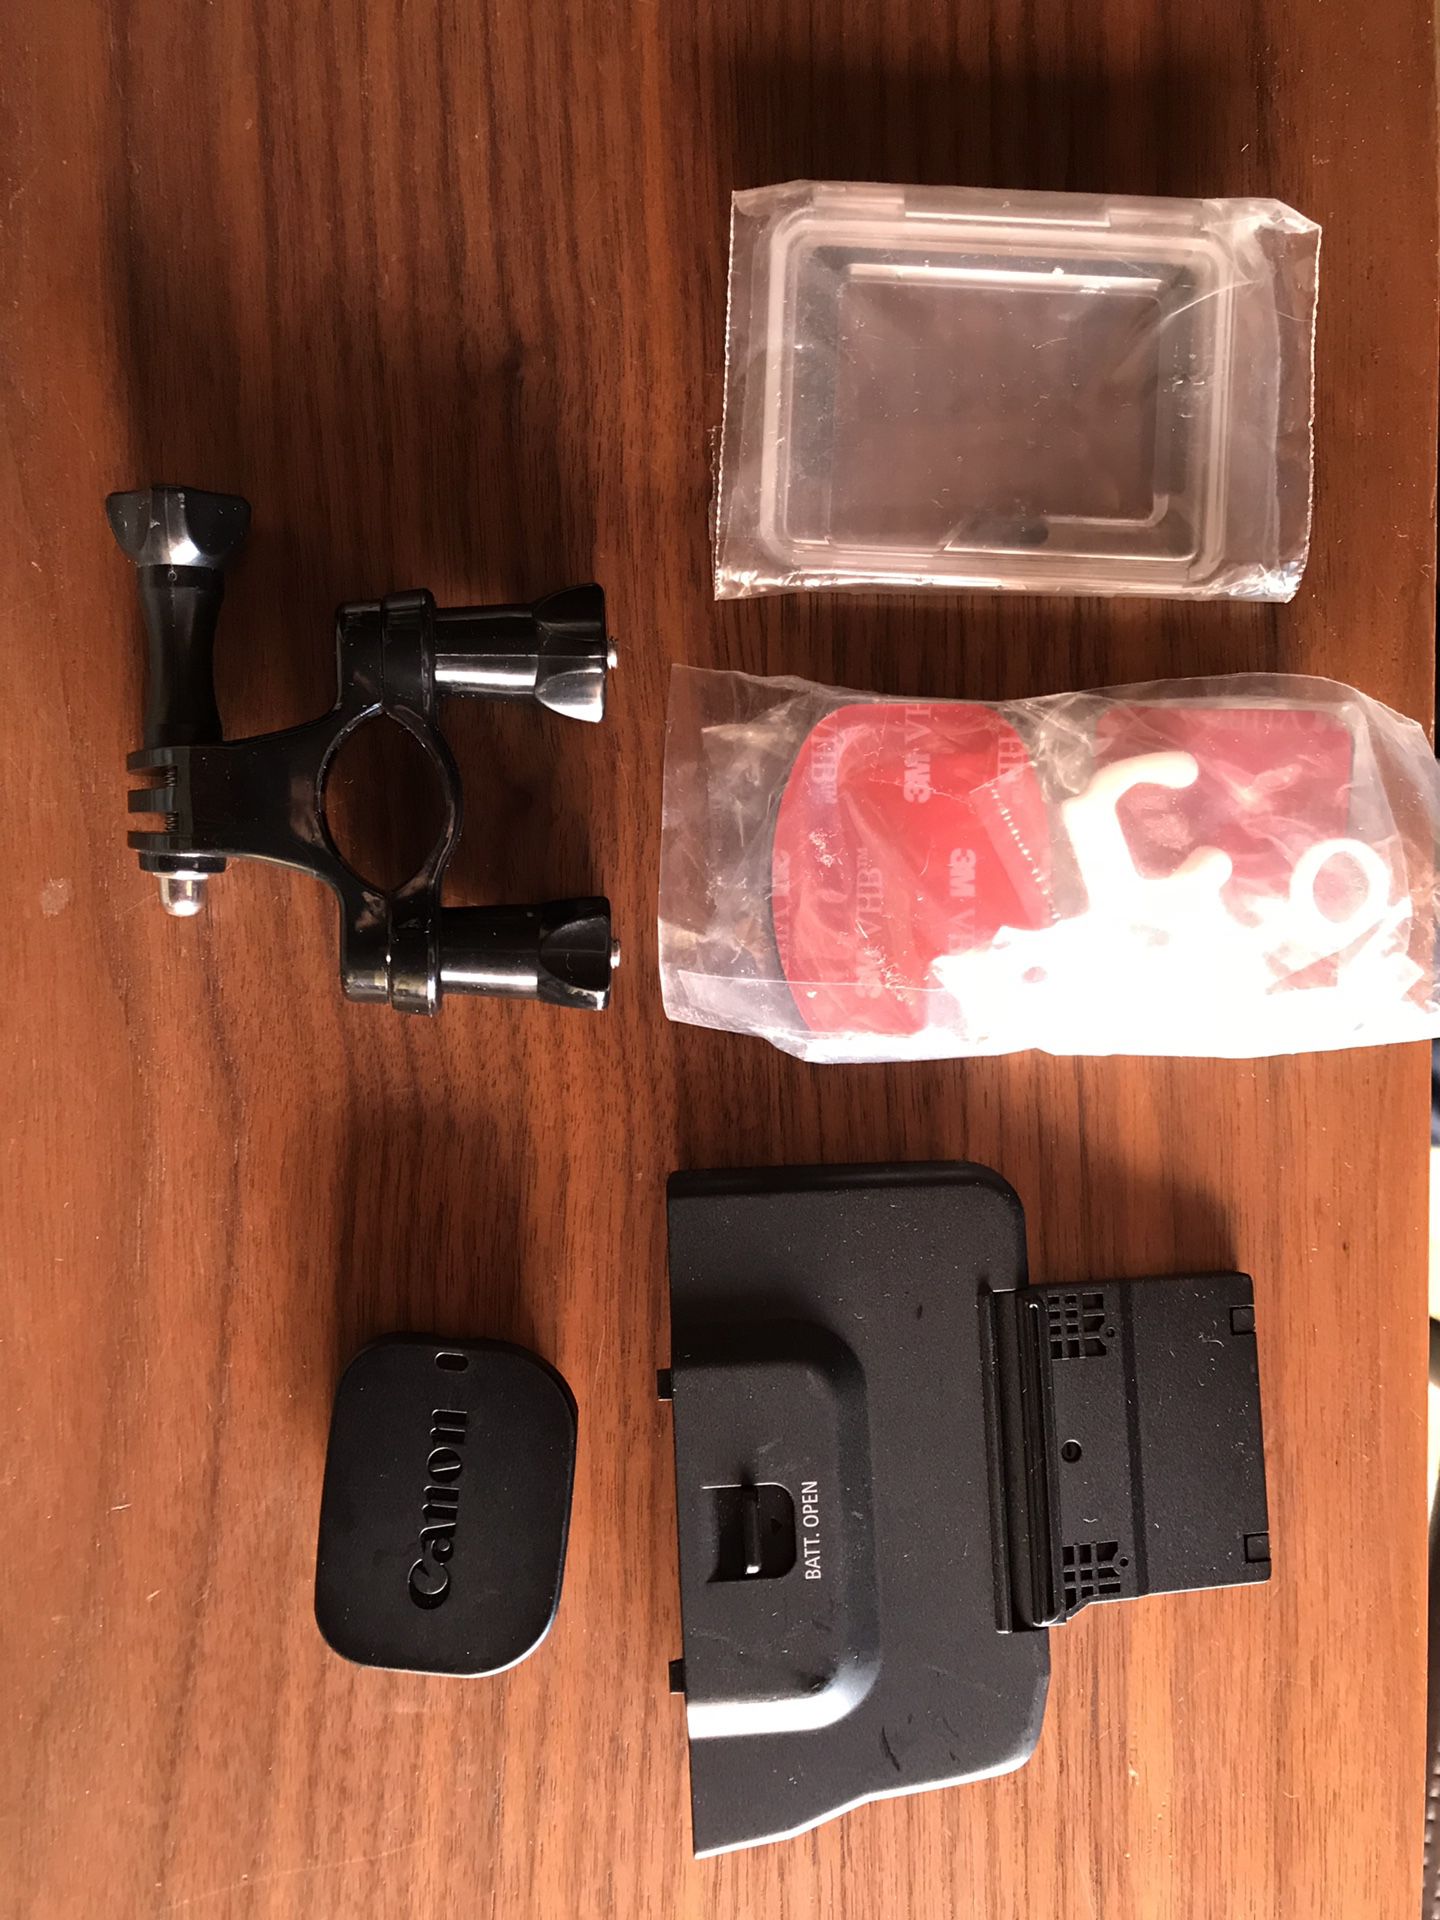 Canon C300 battery and eye cap / go pro accessories